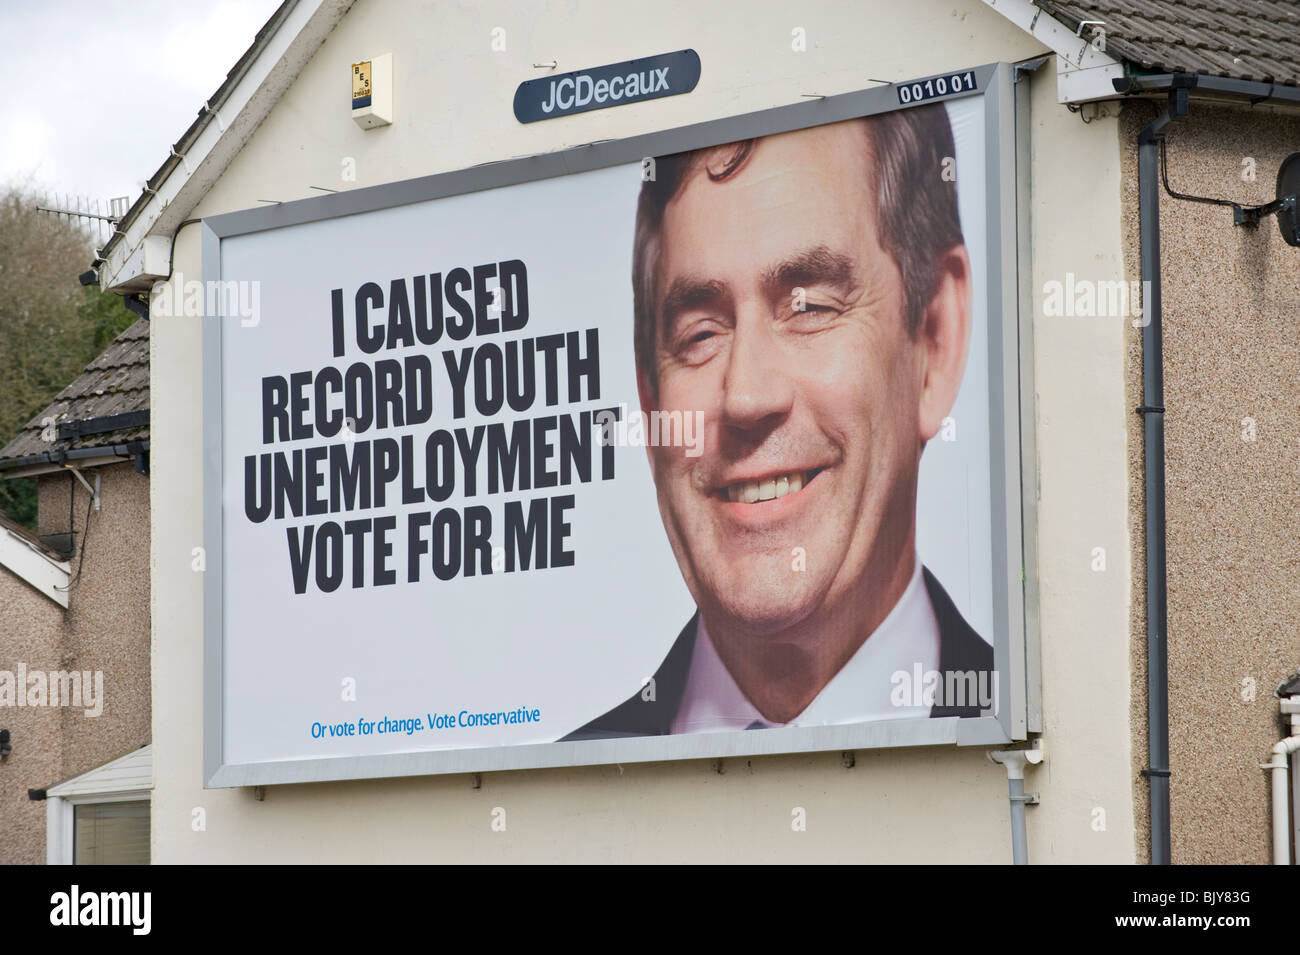 conservative-party-2010-general-election-billboard-at-jc-decaux-site-BJY83G.jpg